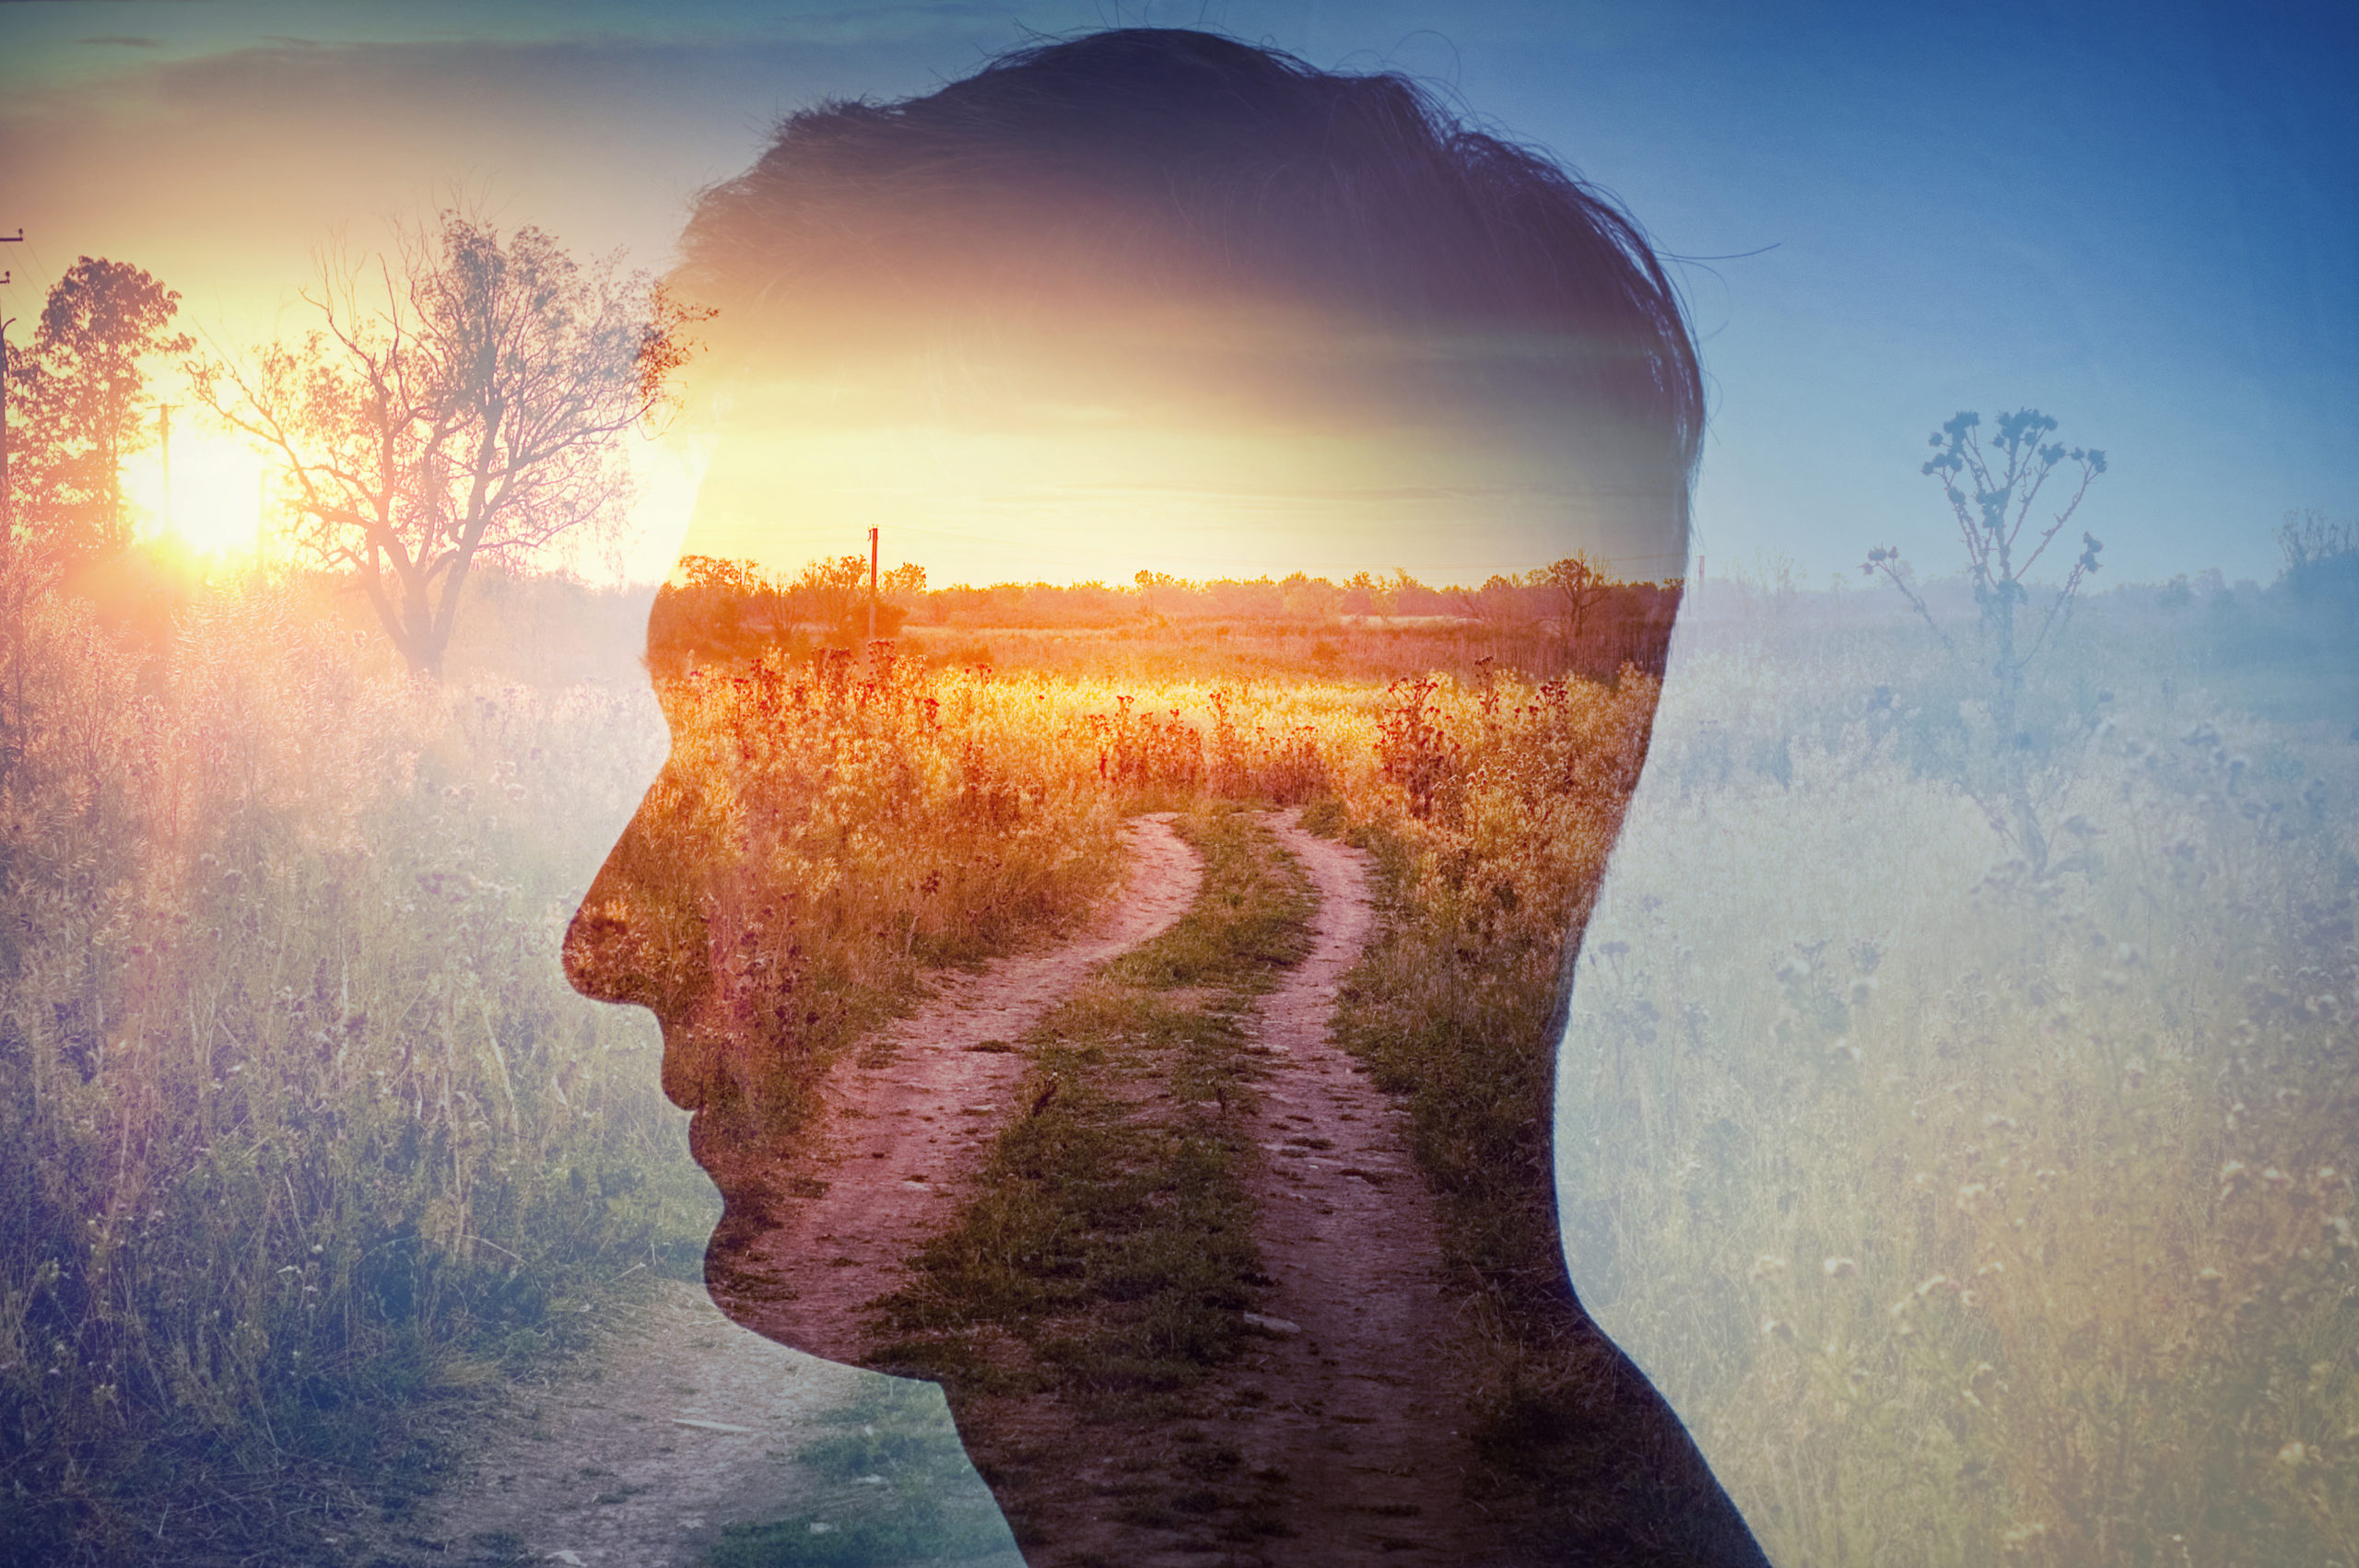 Man Silhouette On Rural Landscape Background. Psychiatry And Psychology Concept.